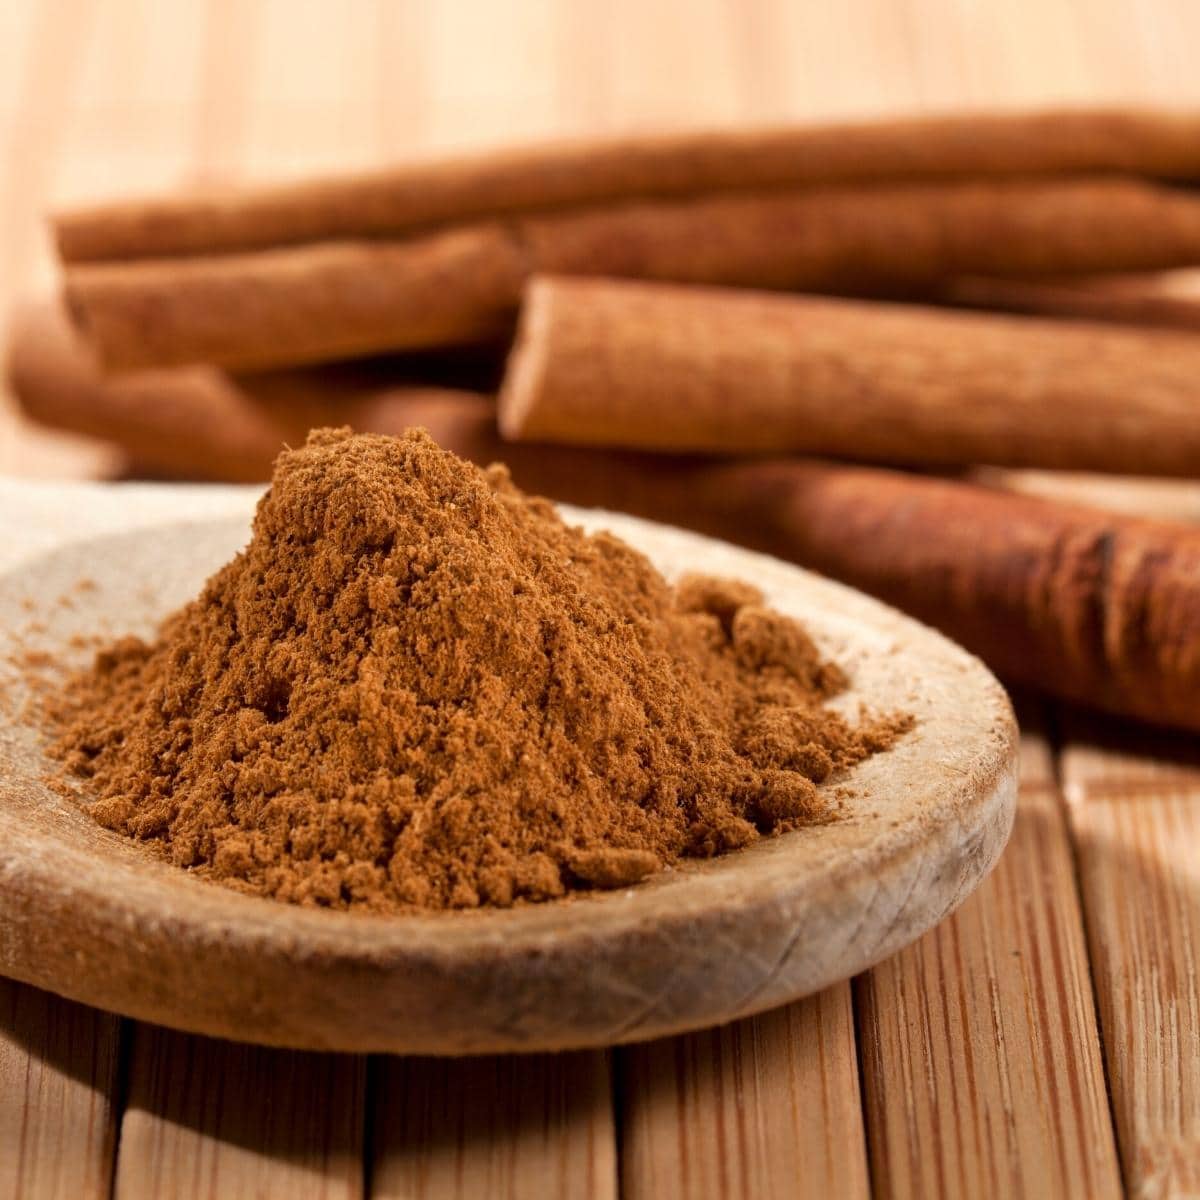 Ground cinnamon resting in a wooden dish.